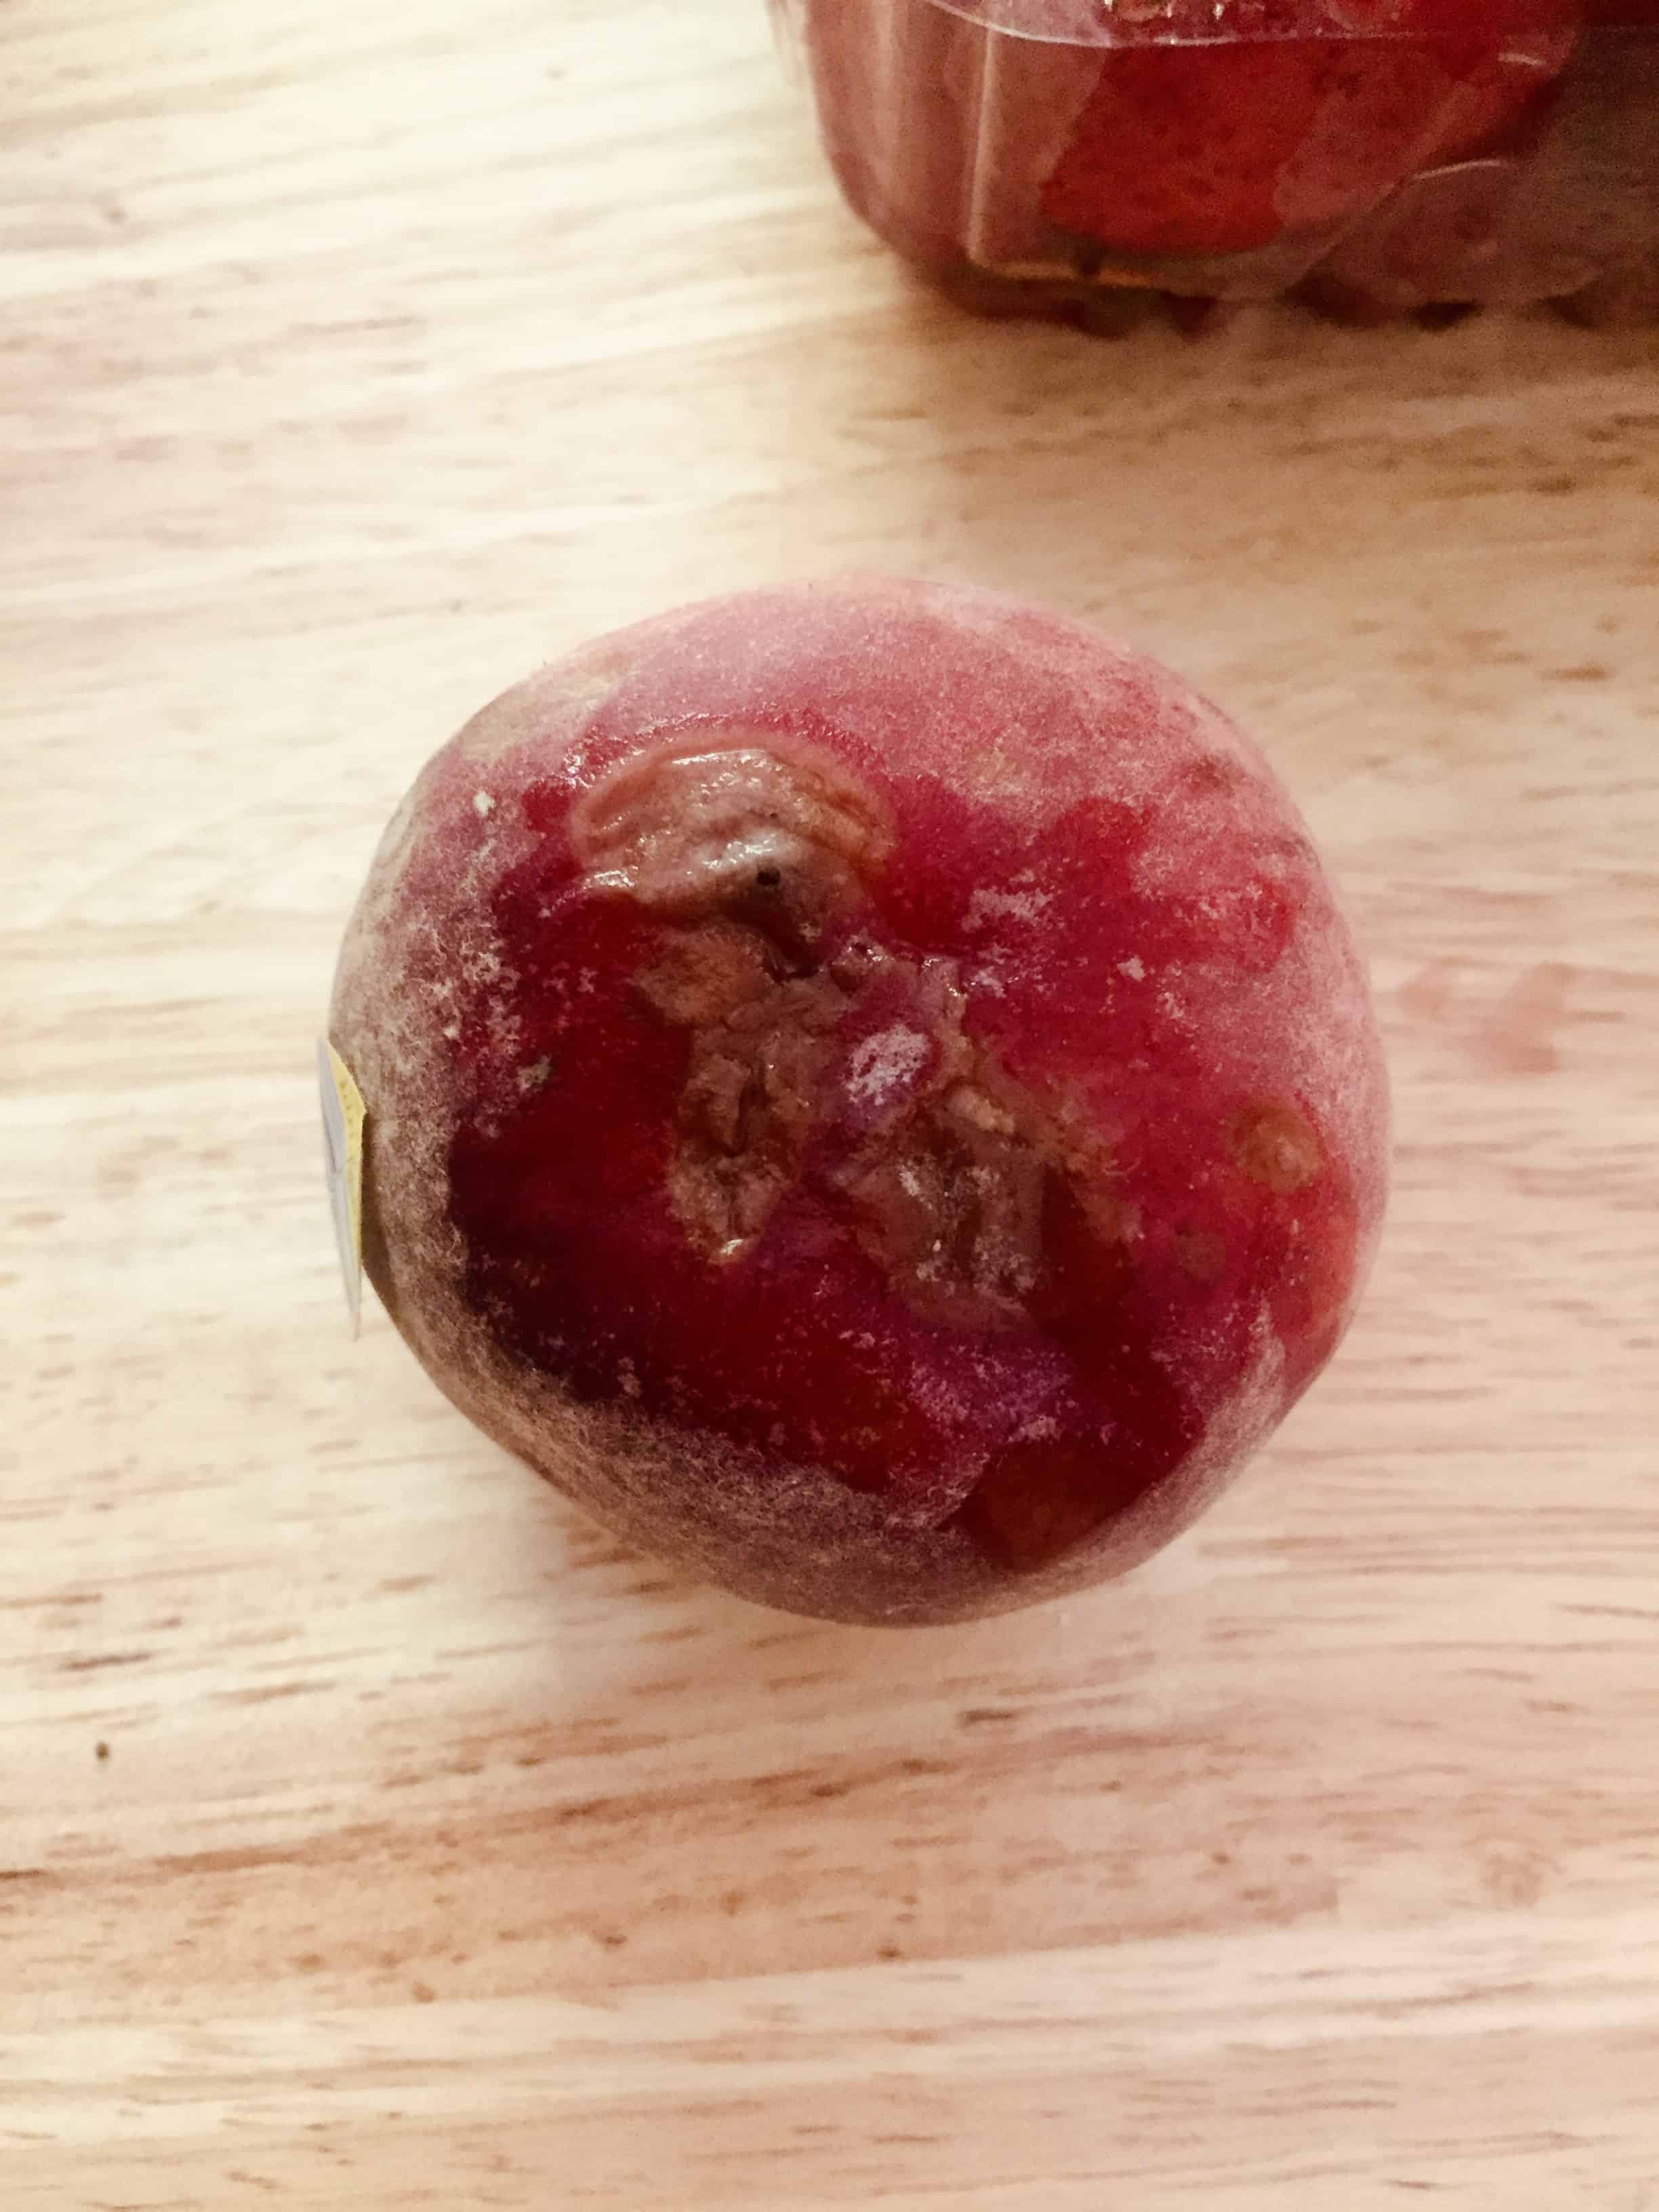 This peach wasn't imperfect. It was inedible. It had mold and bruising on every side.